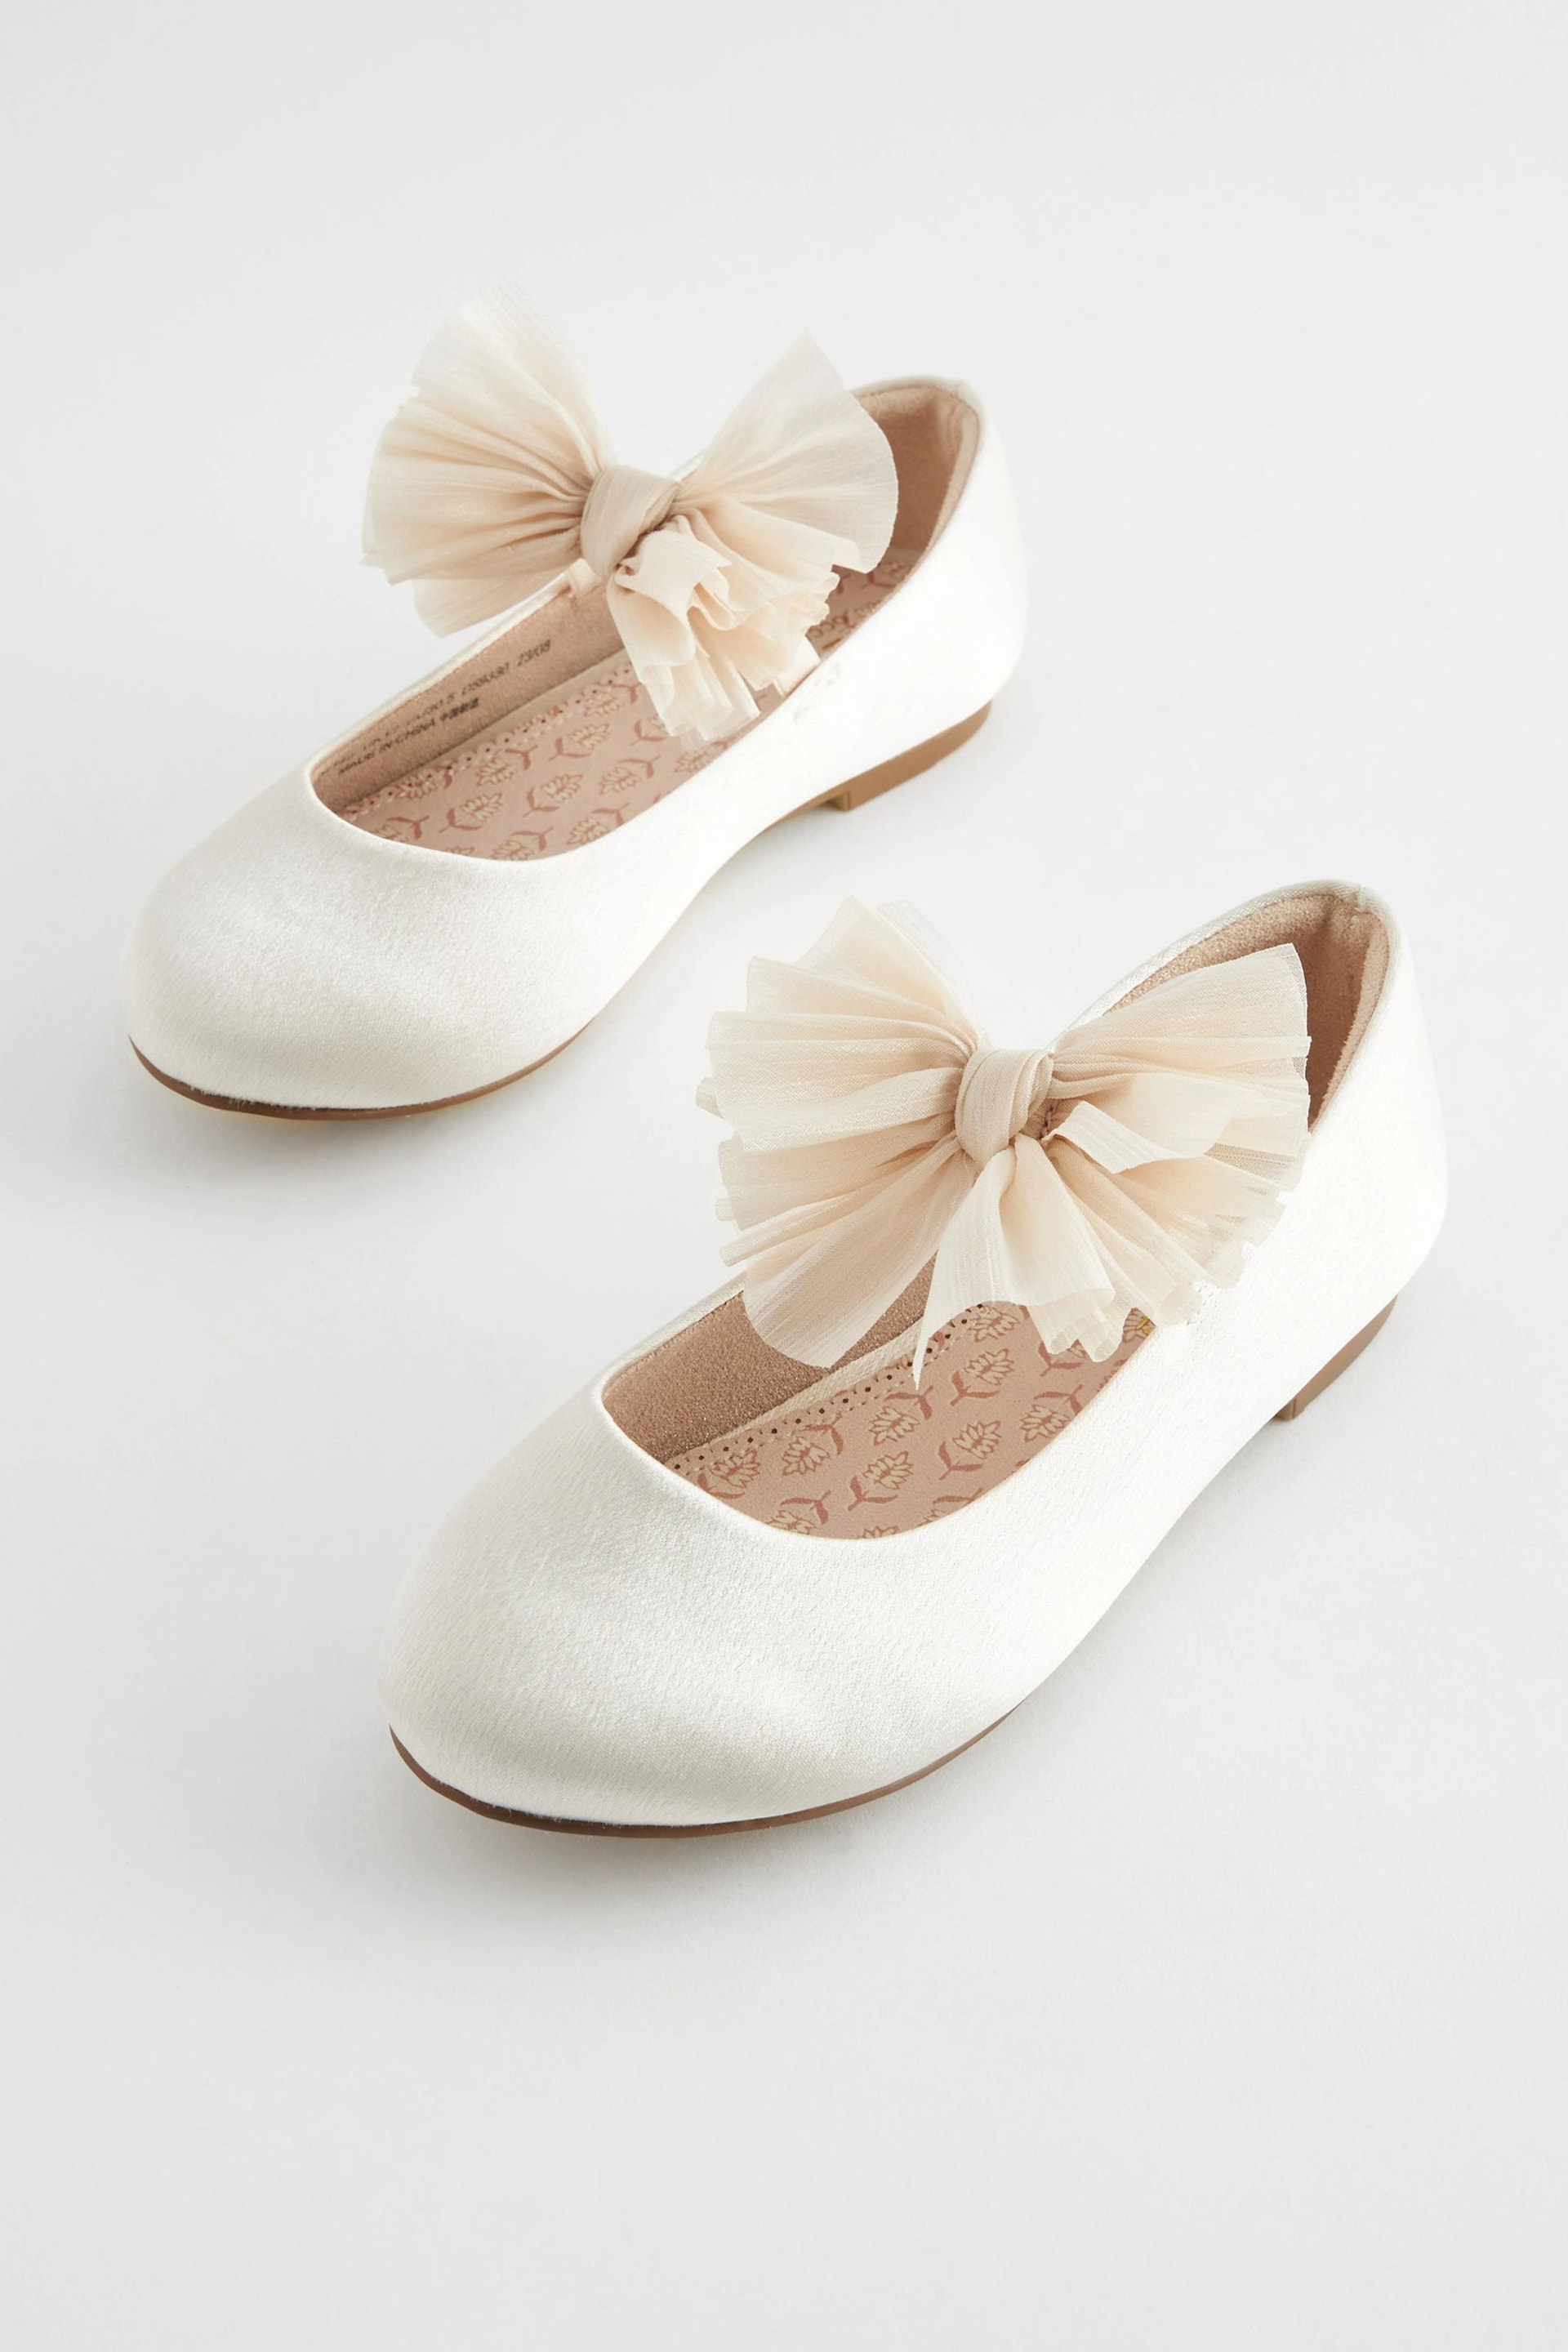 Ivory Cream Bow Stain Resistant Satin Bridesmaid Ballet Shoes - Image 4 of 7